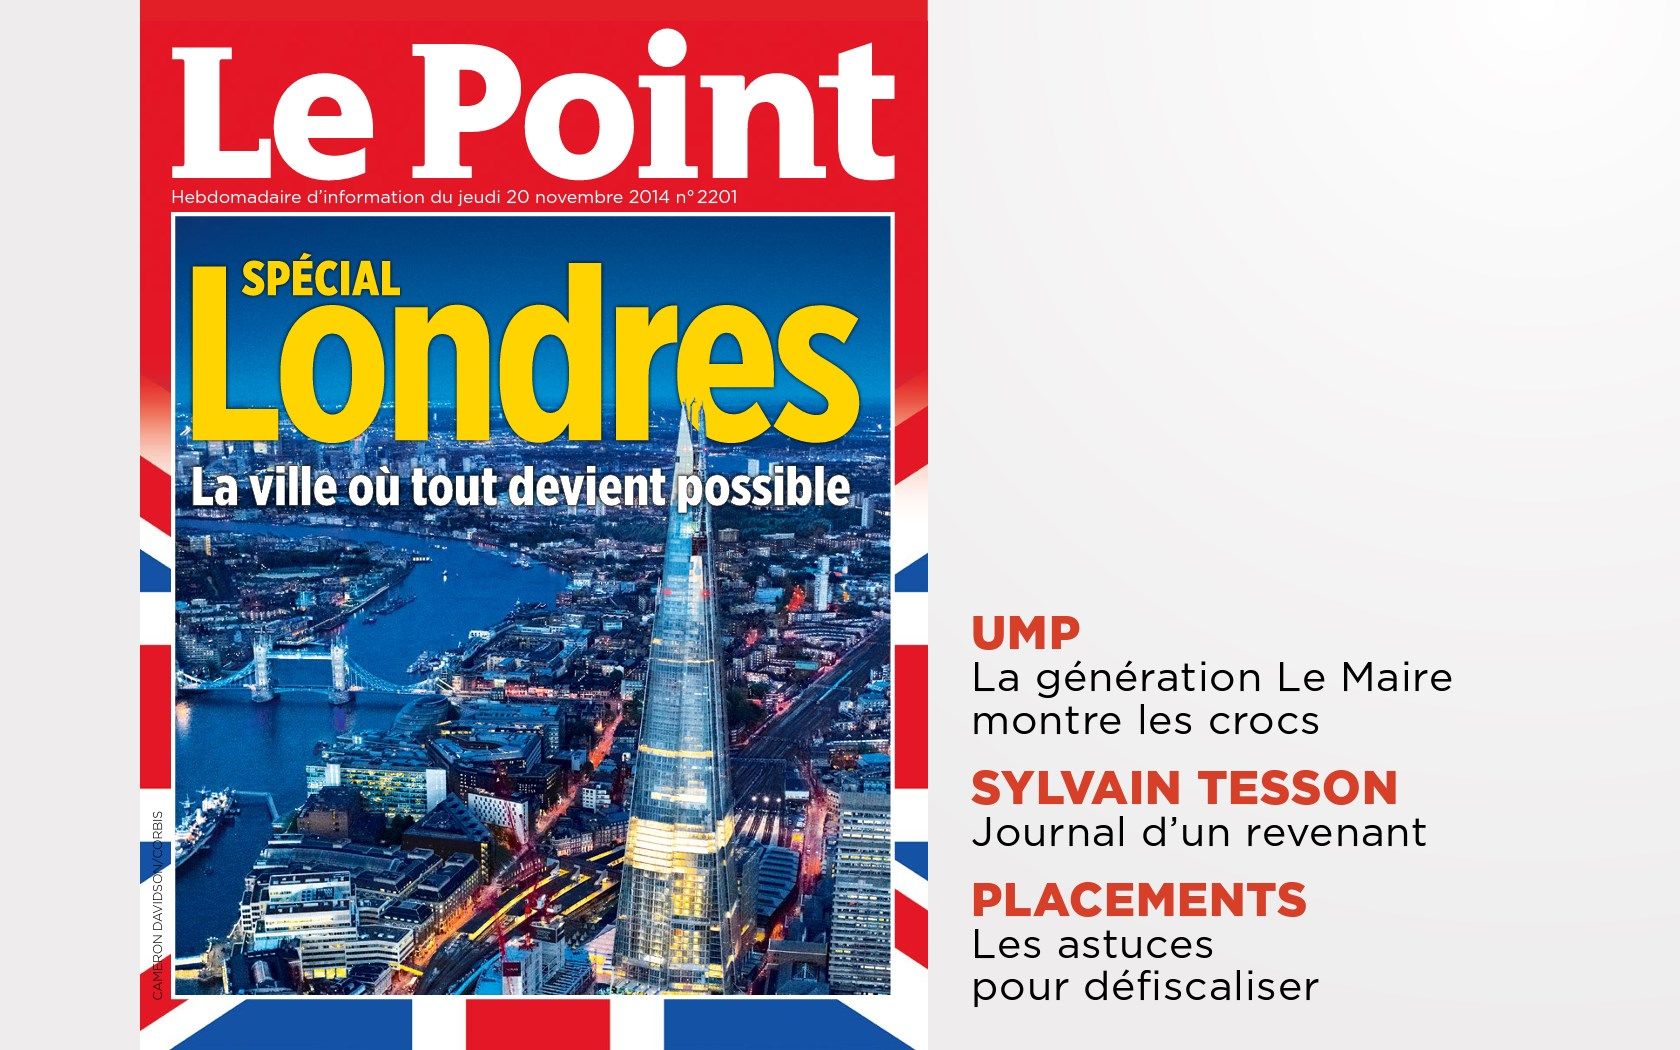 Receive your issue of Le Point every week on your tablet or computer Windows.